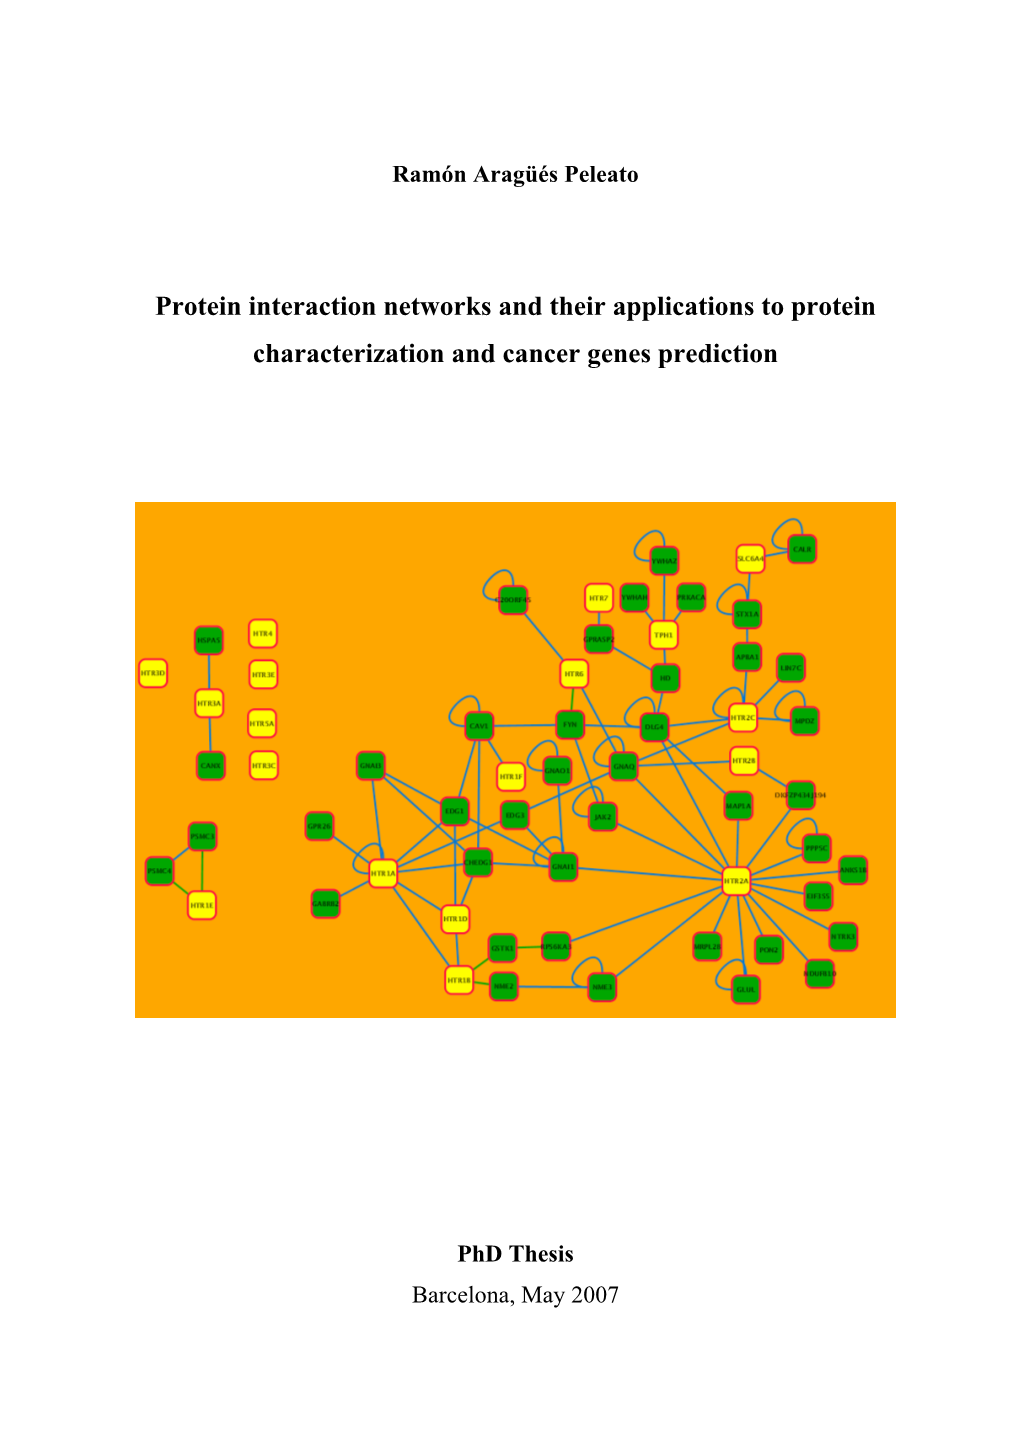 Protein Interaction Networks and Their Applications to Protein Characterization and Cancer Genes Prediction